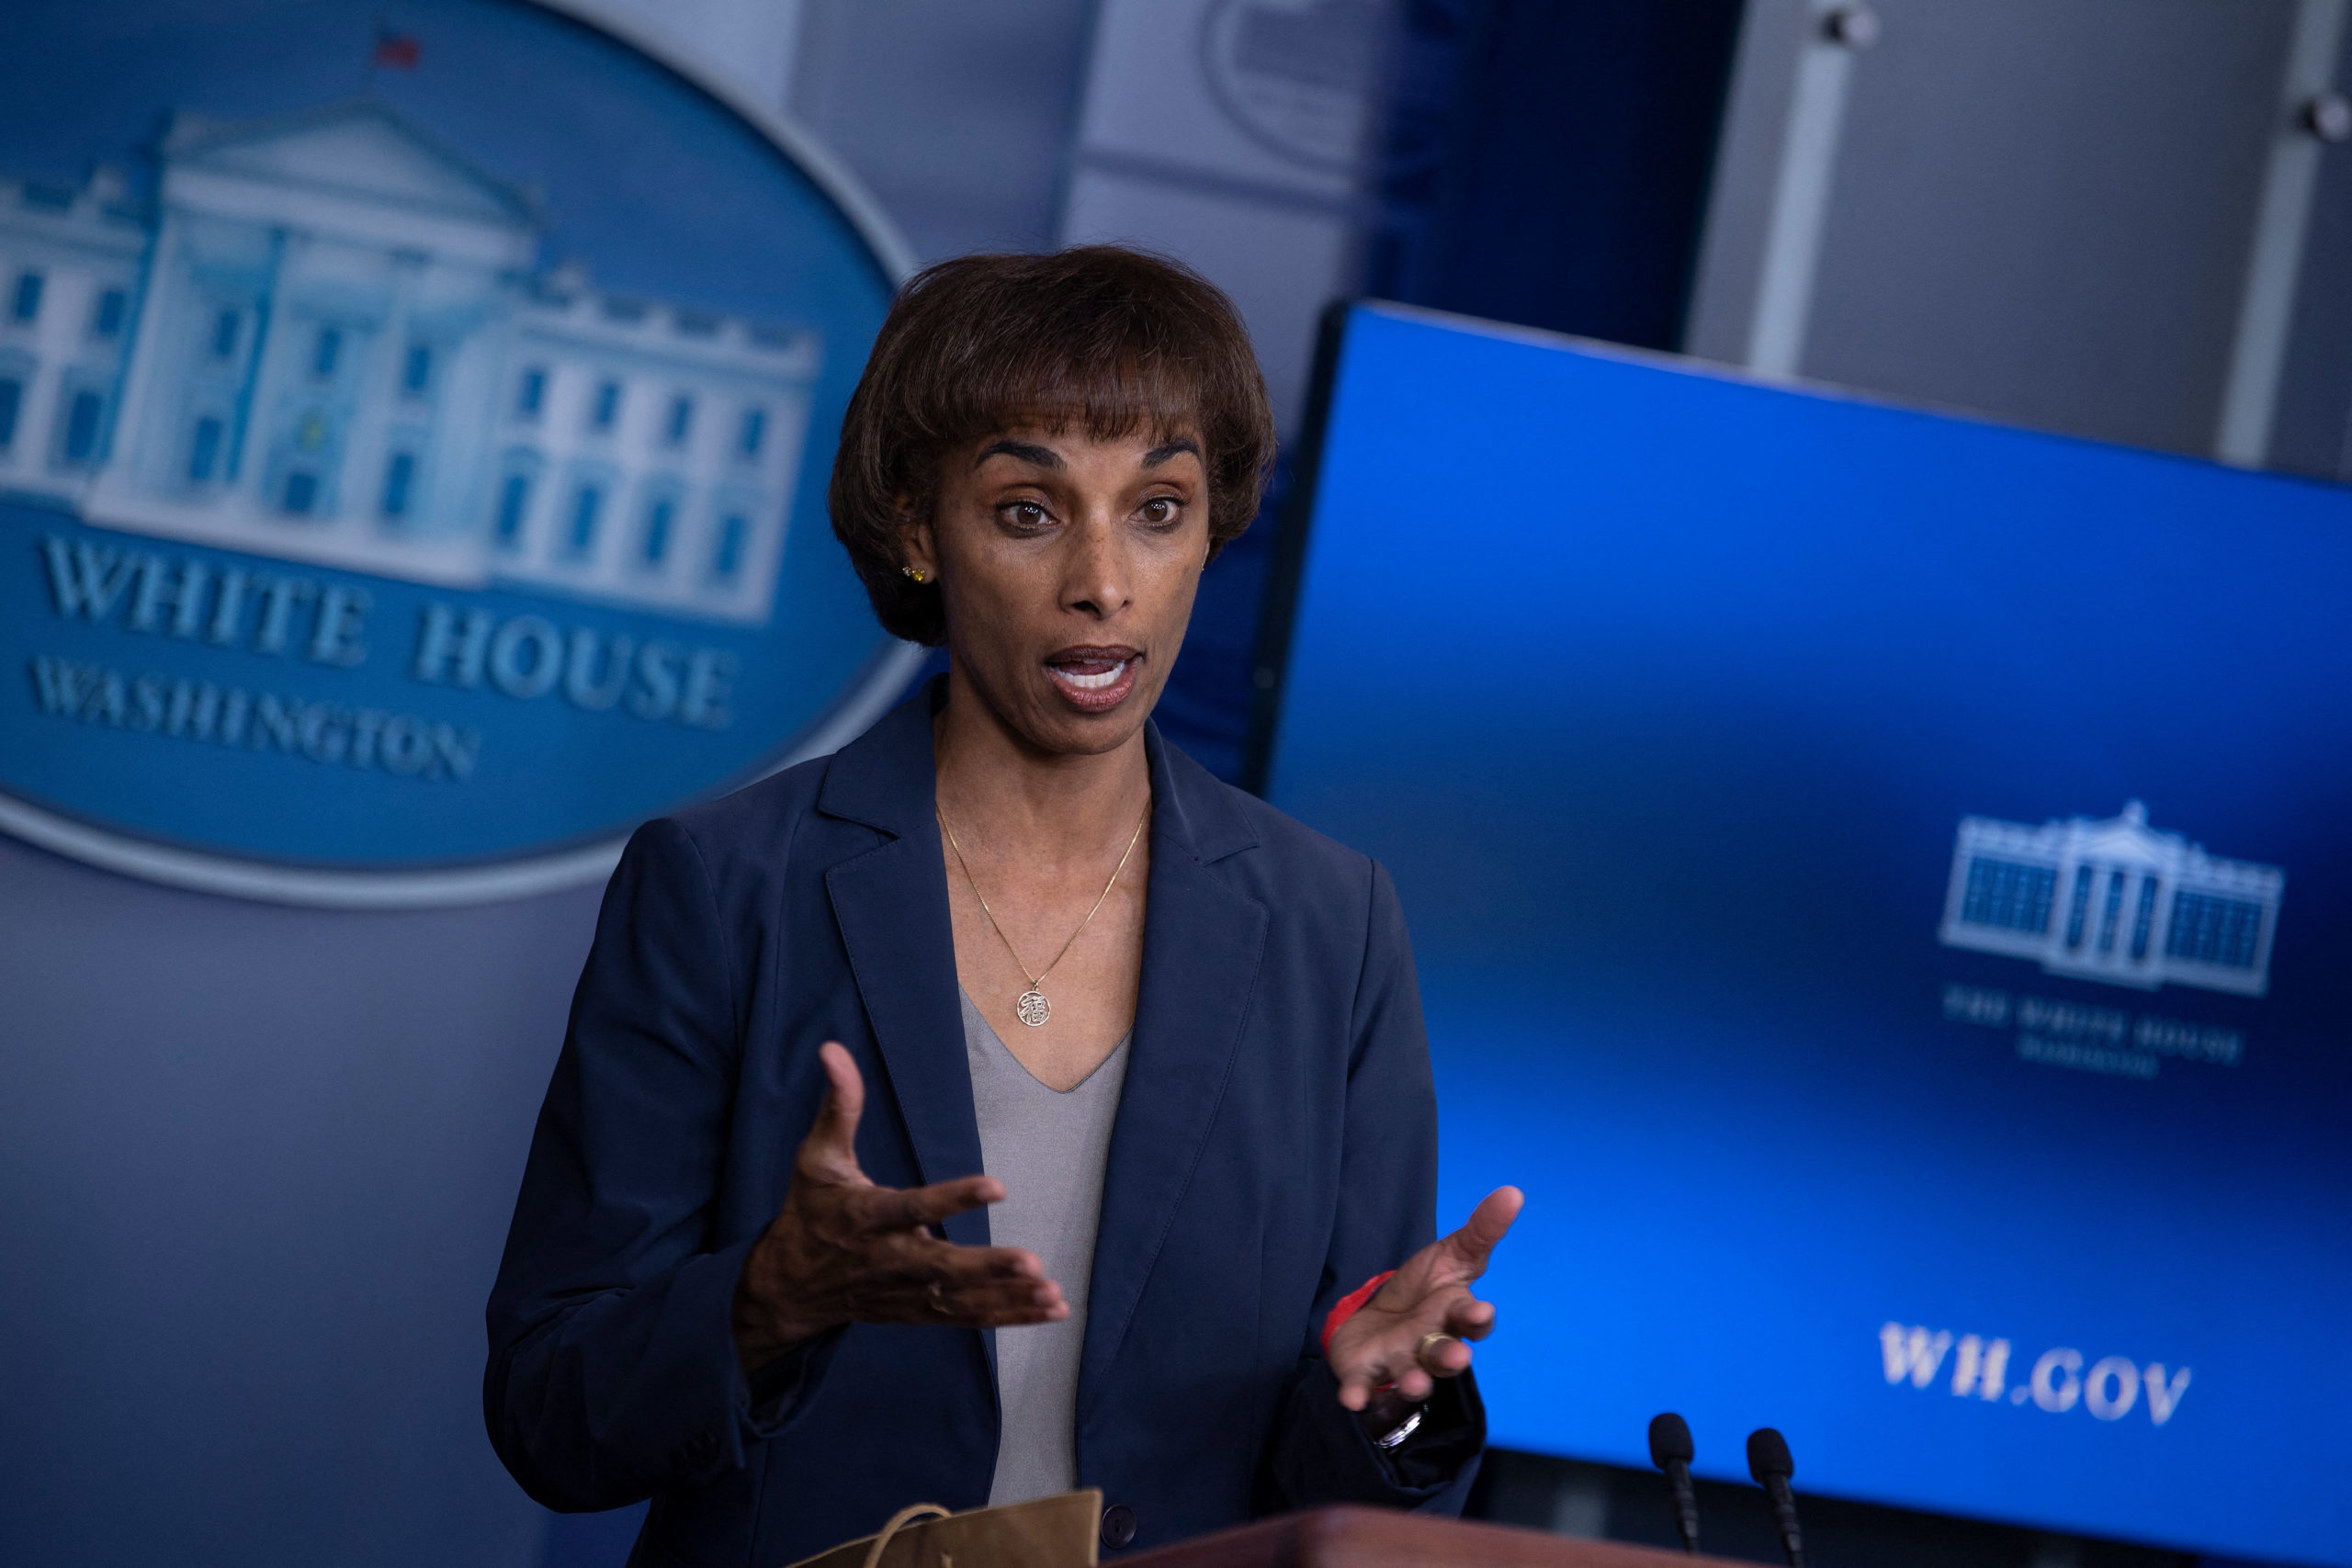 Chair of the Council of Economic Advisers Cecilia Rouse speaks during a briefing at the White House on May 14. (Brendan Smialowski/AFP via Getty Images)